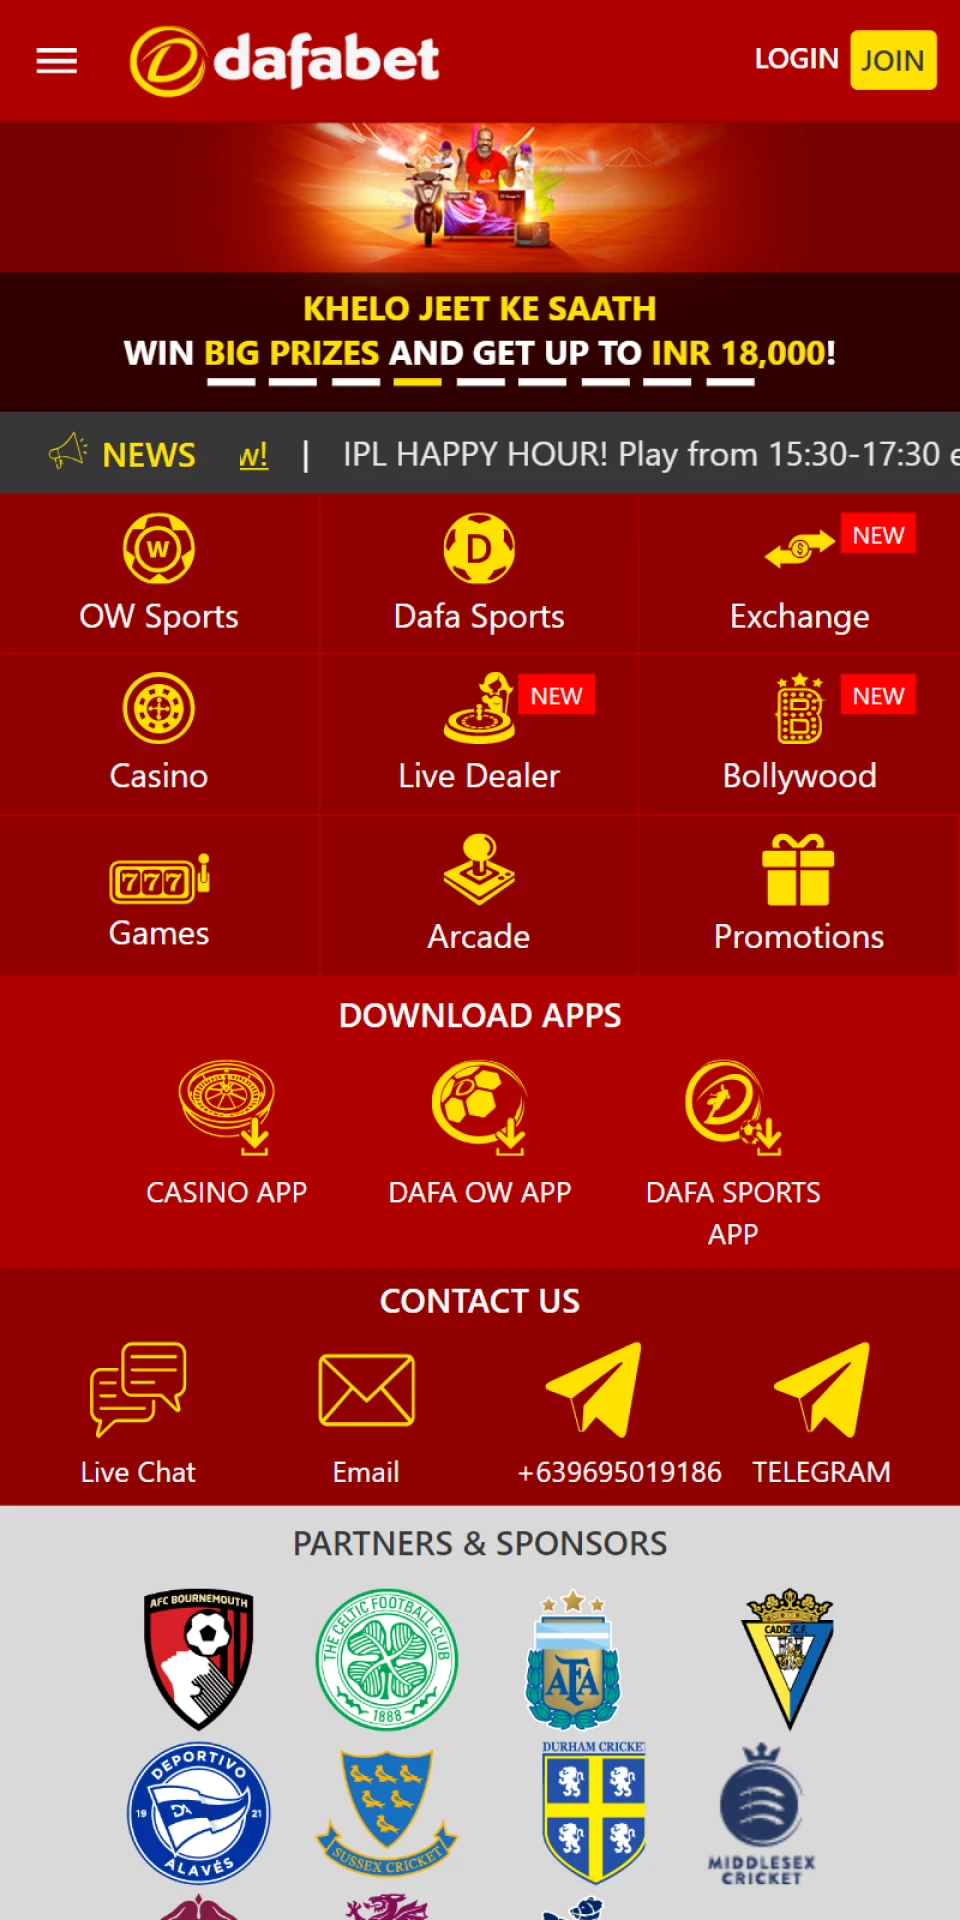 Visit the Dafabet website from your iOS device.